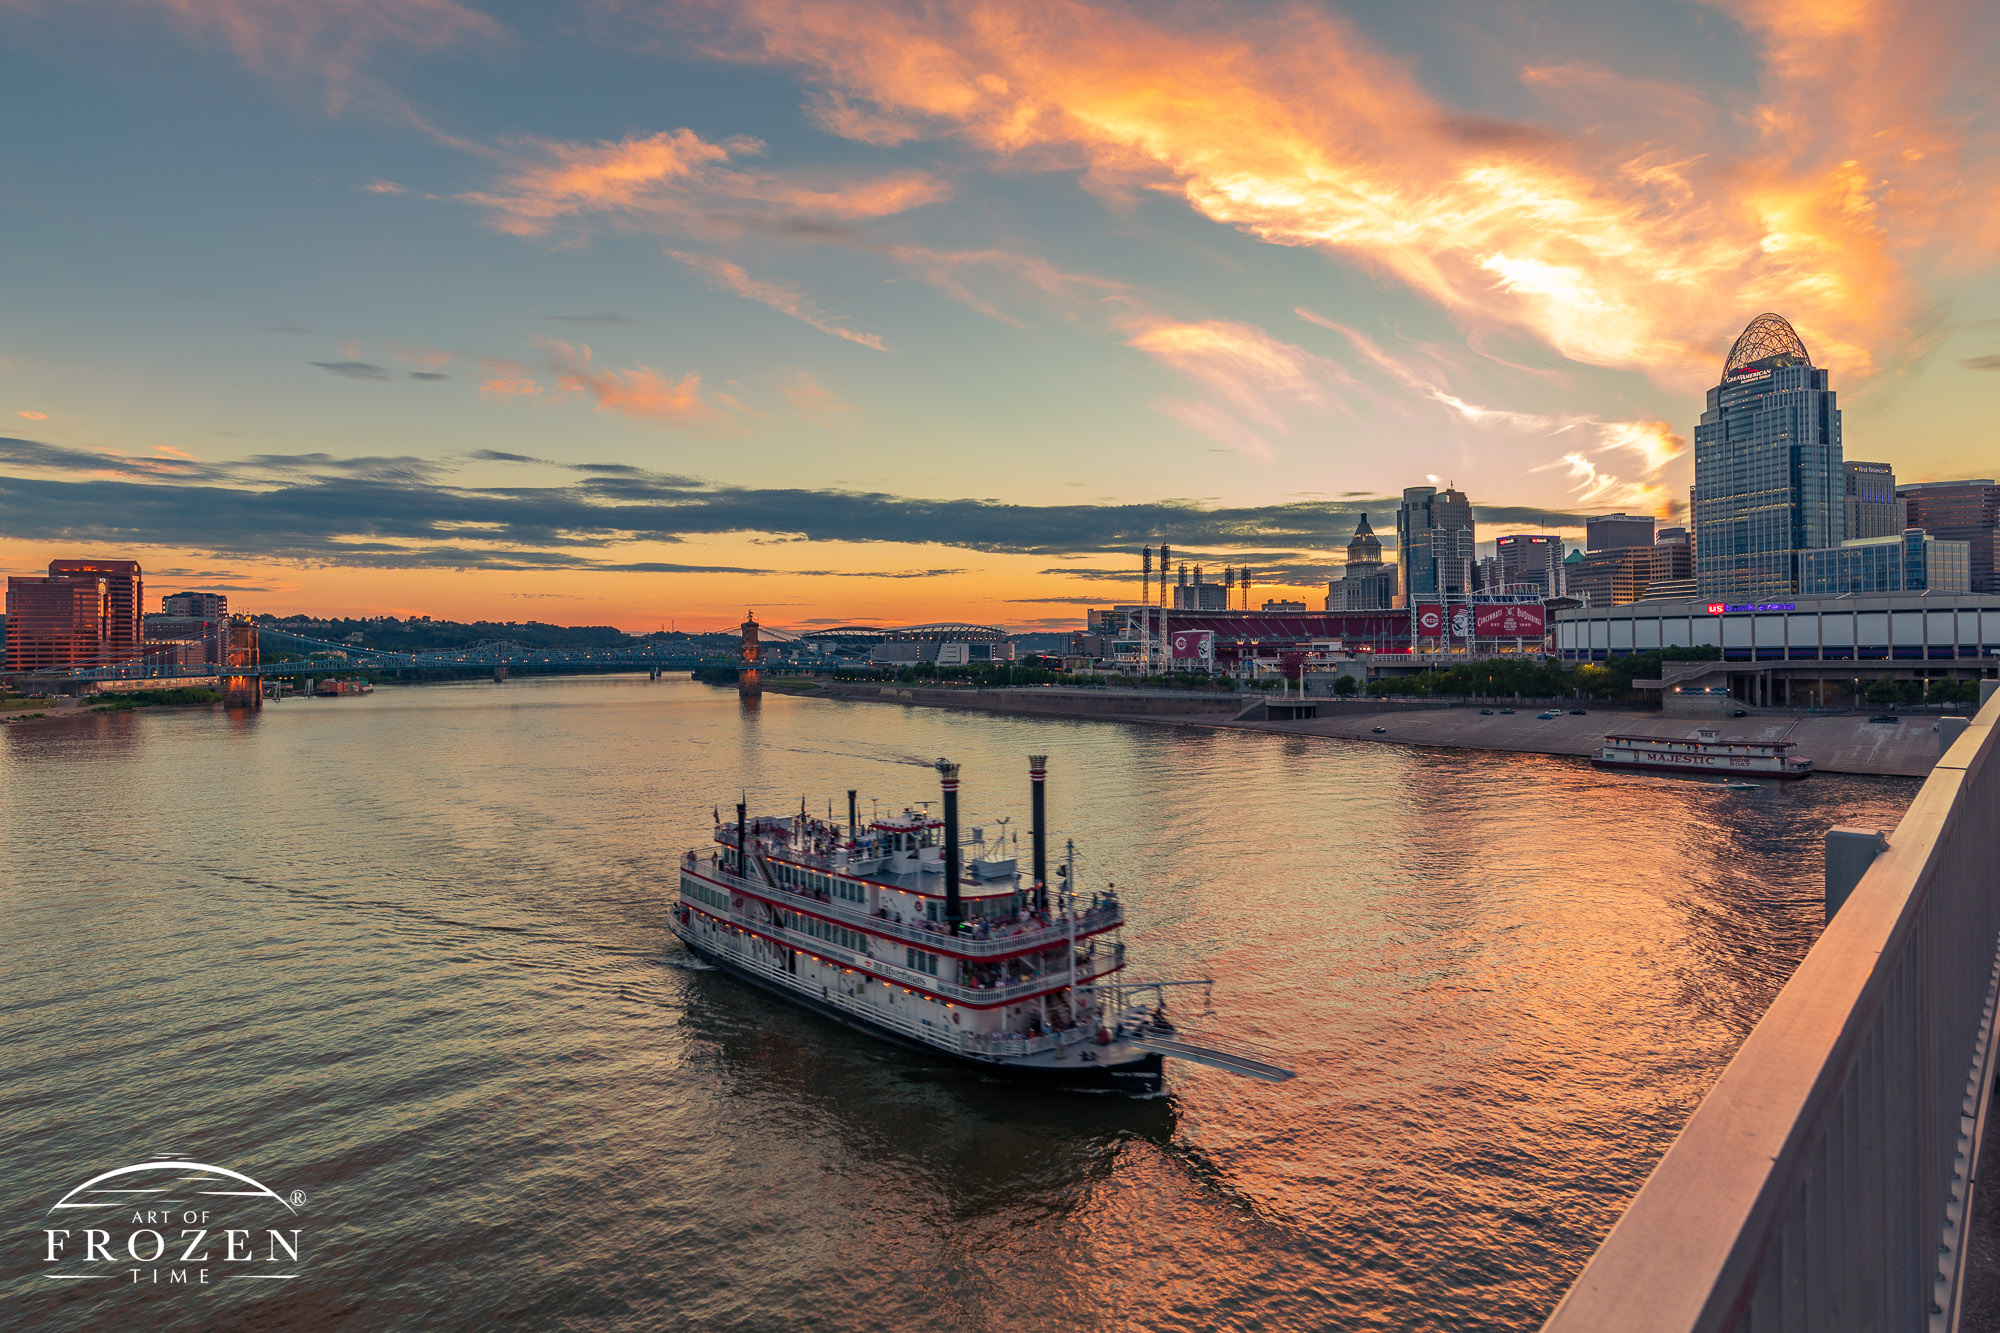 Ohio River Paddleboat powers its way by the Cincinnati Ohio skyline under colorful sunset skies.